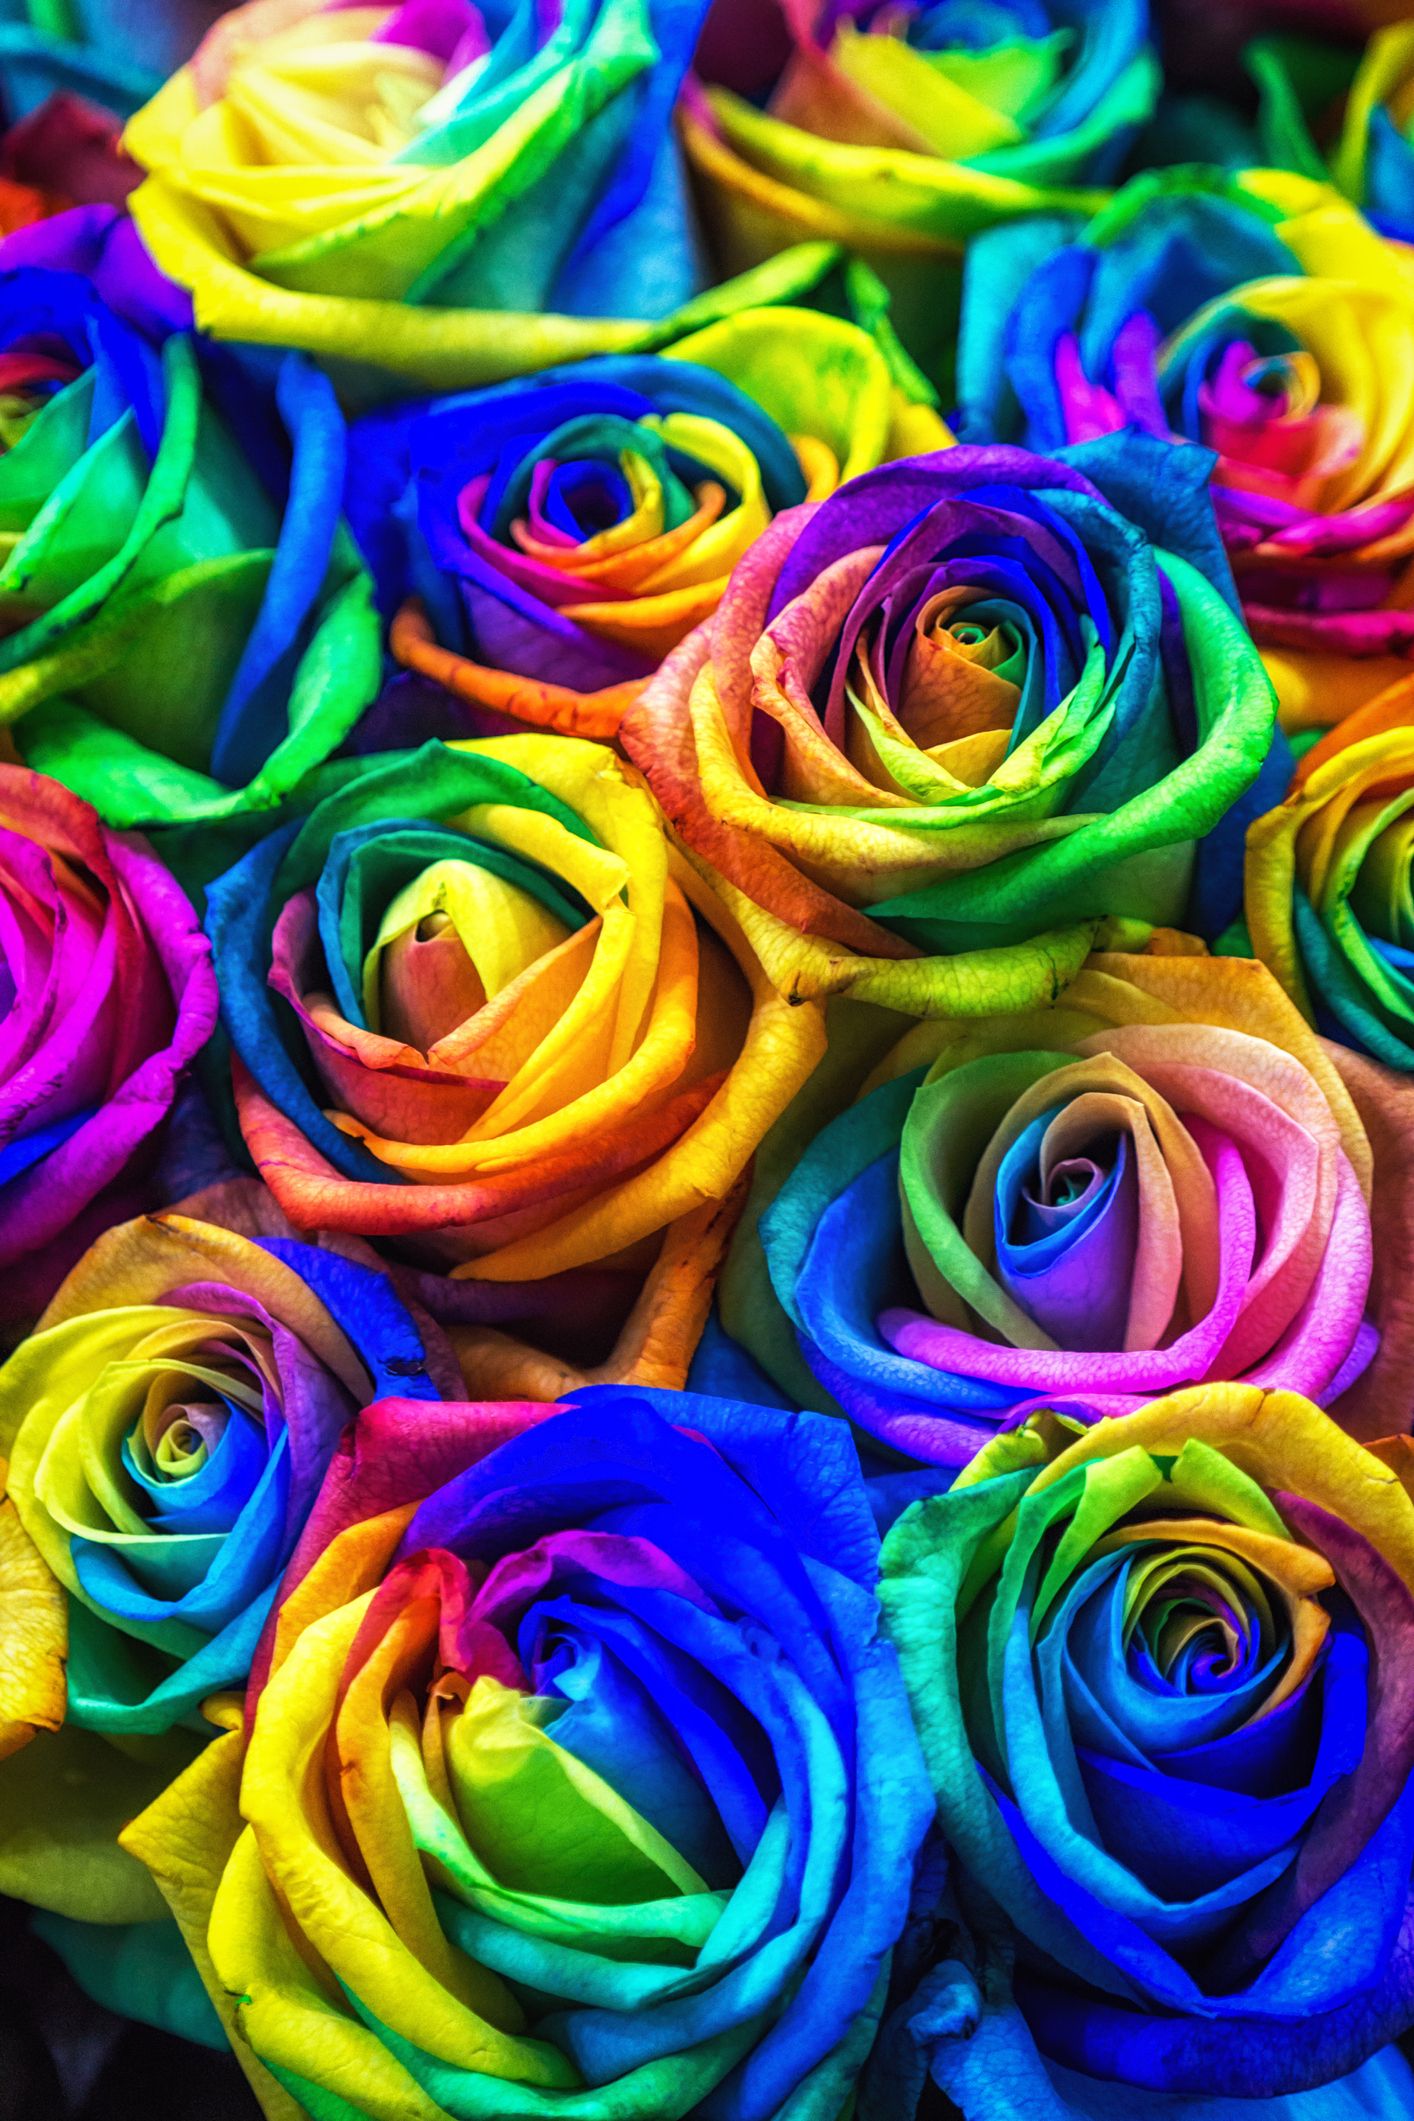 how many natural rose colors are there